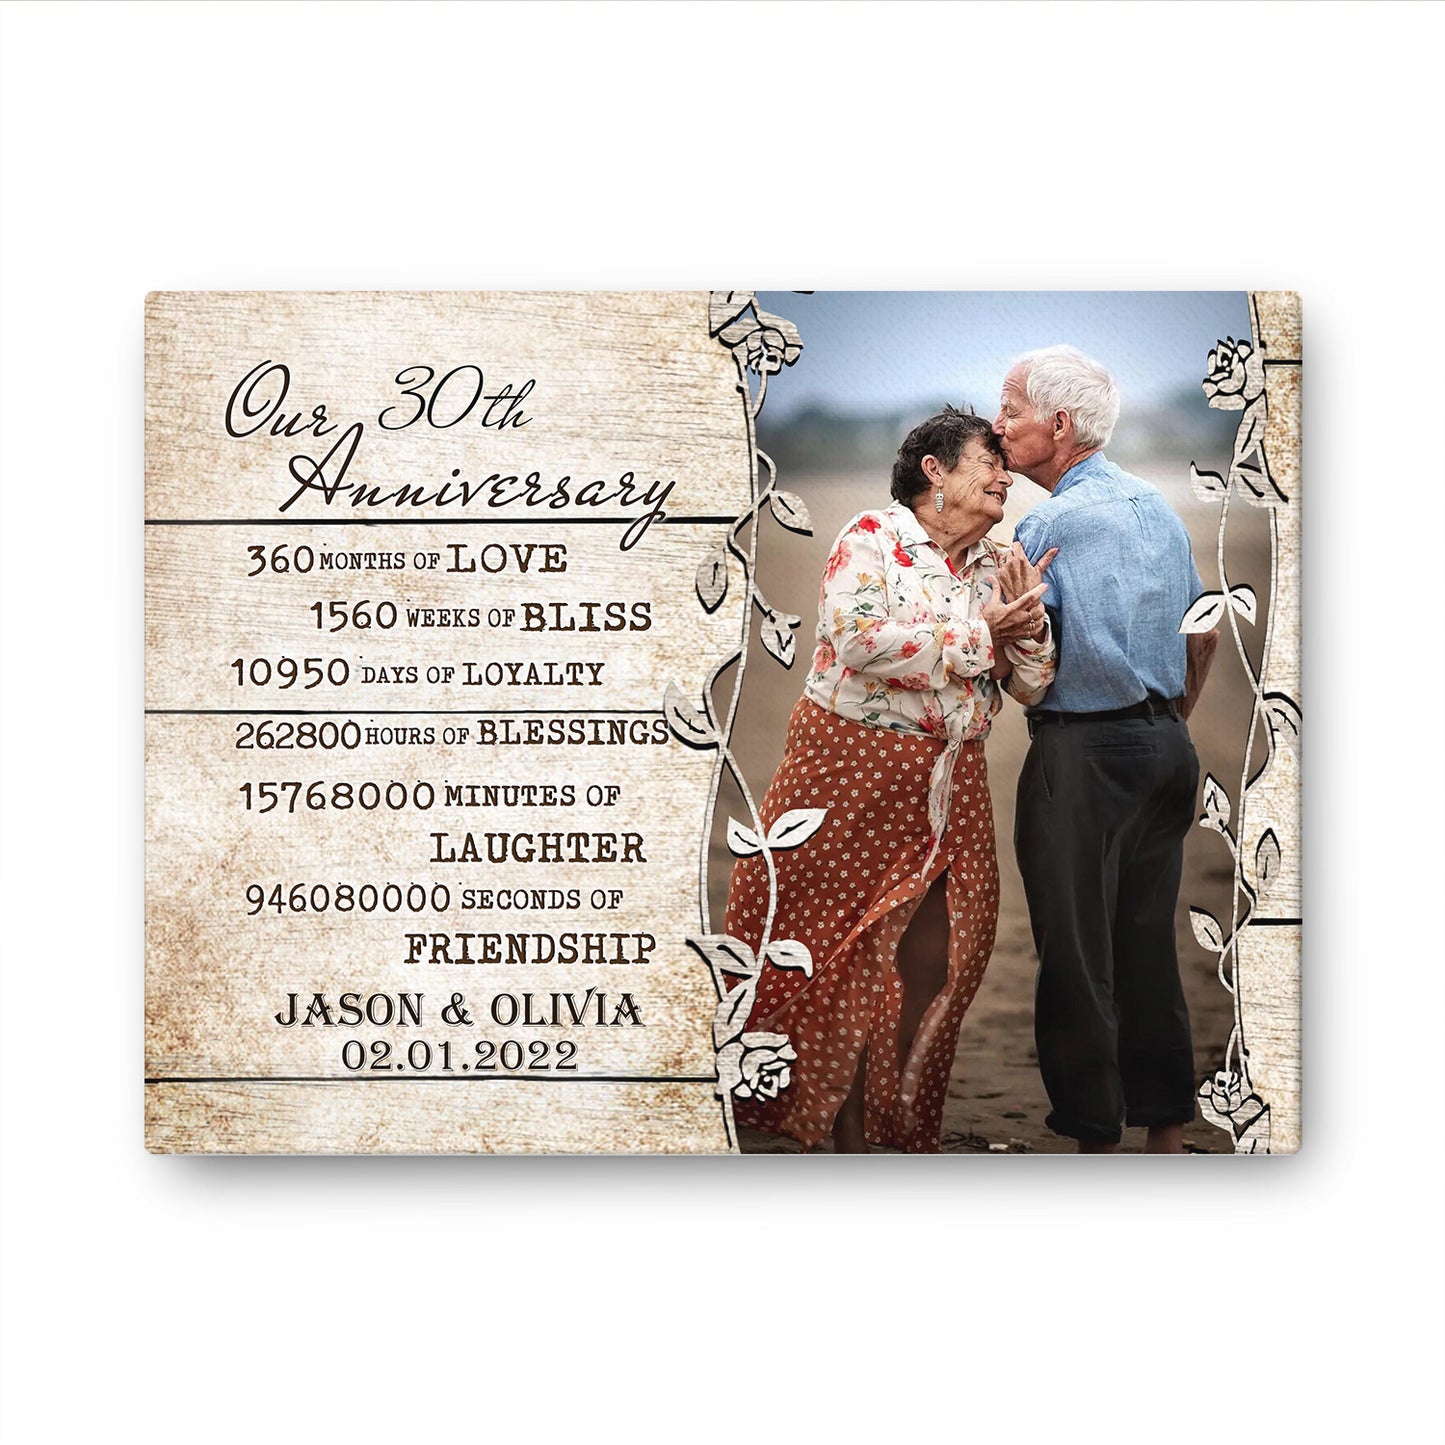 Our 30th Anniversary Timeless love Valentine Gift Personalized Canvas